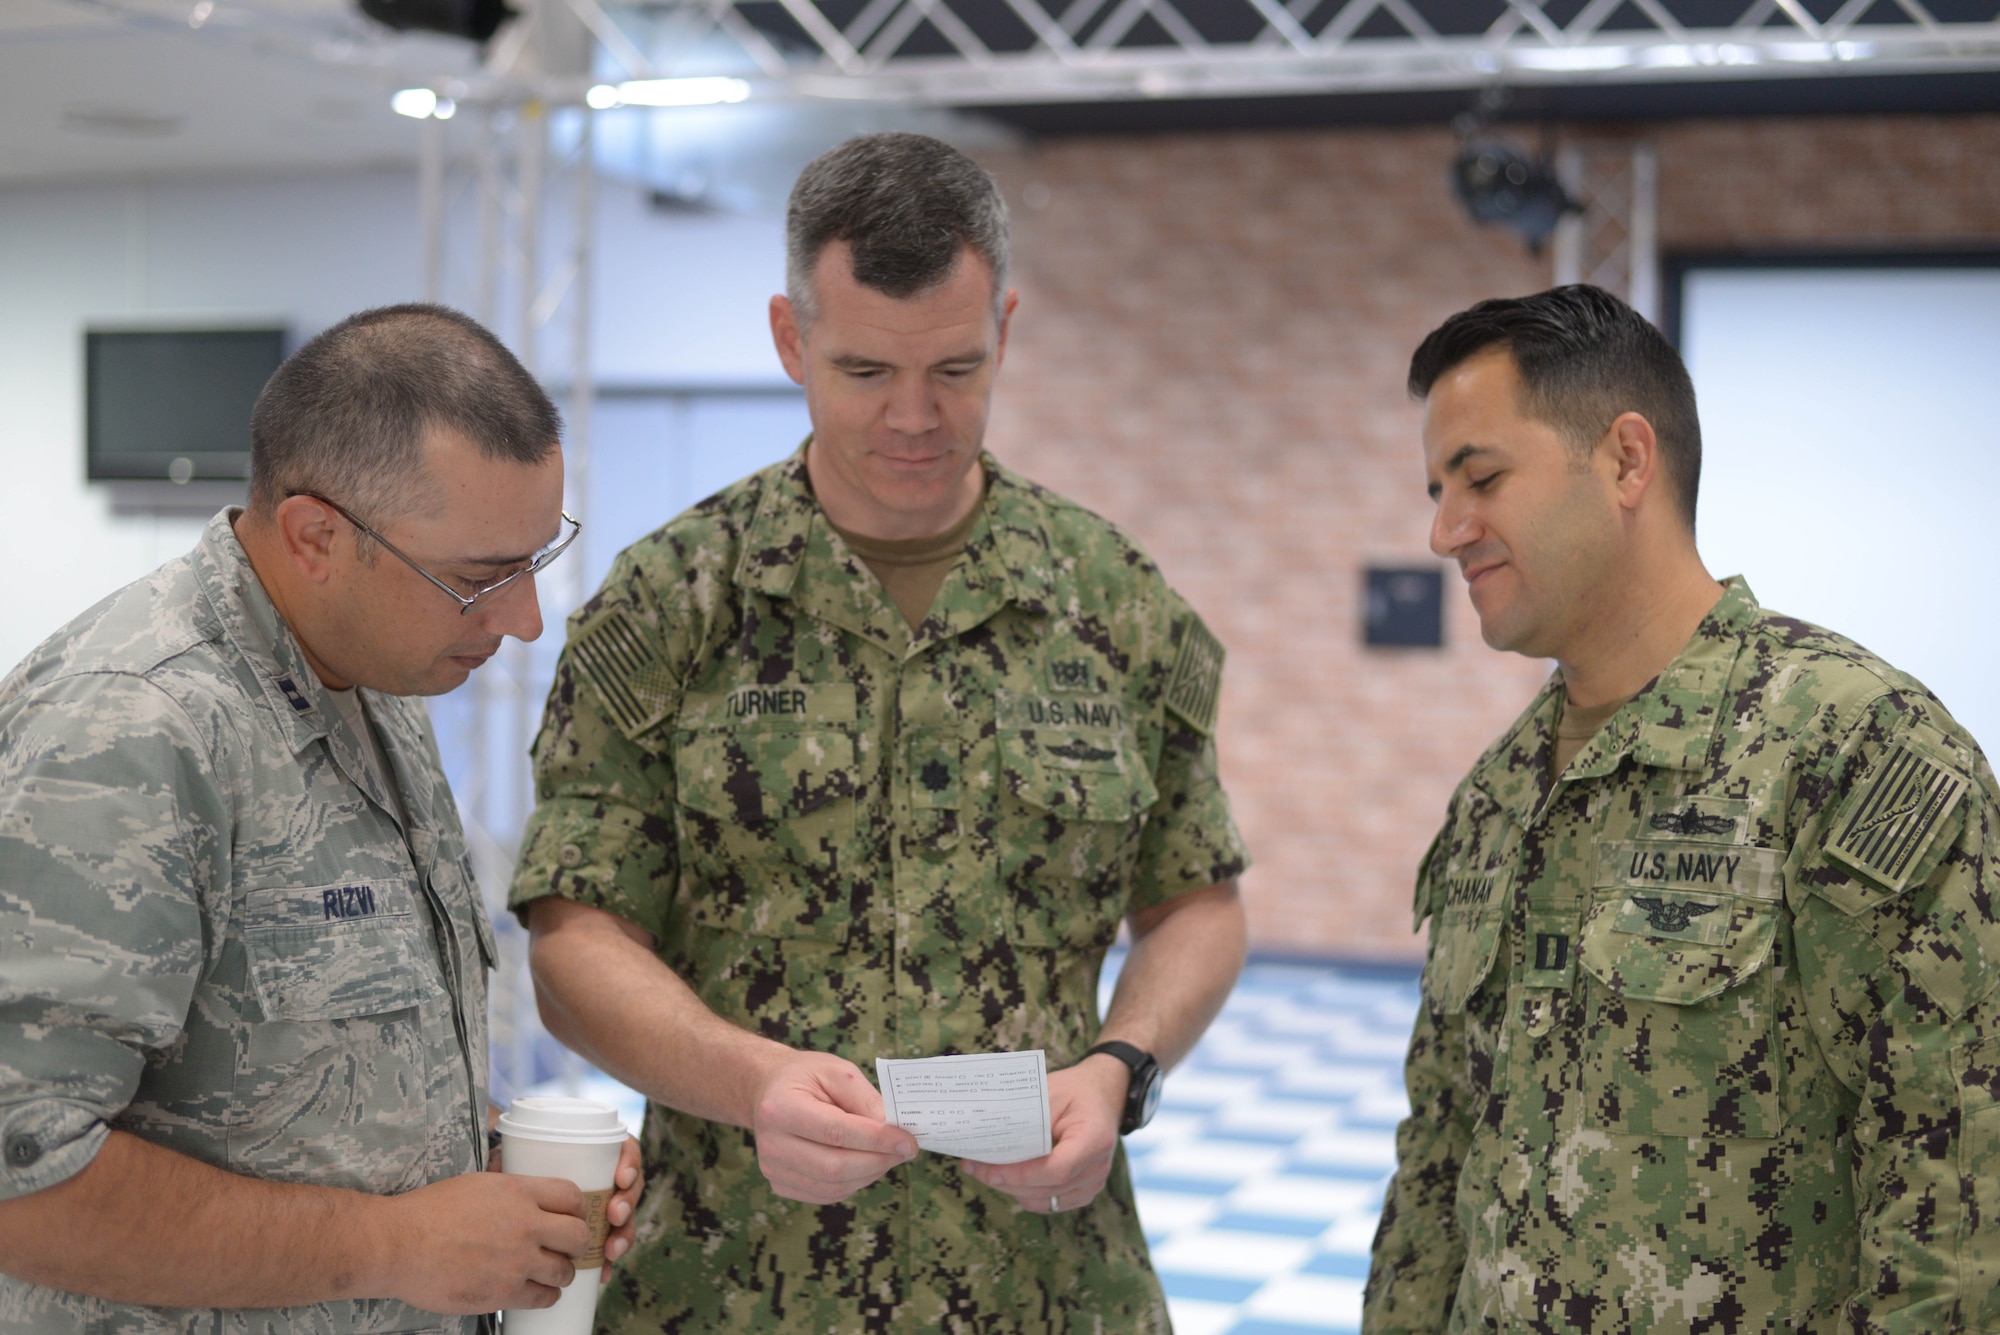 Medical personnel from Yokosuka Naval Base, Japan, and Yokota Air Base, Japan worked together during the tabletop exercise portion of the Medical Management of Chemical and Biological Casualties (MCBC) Short Course held at Yokota Air Base, Japan, August 8, 2018.